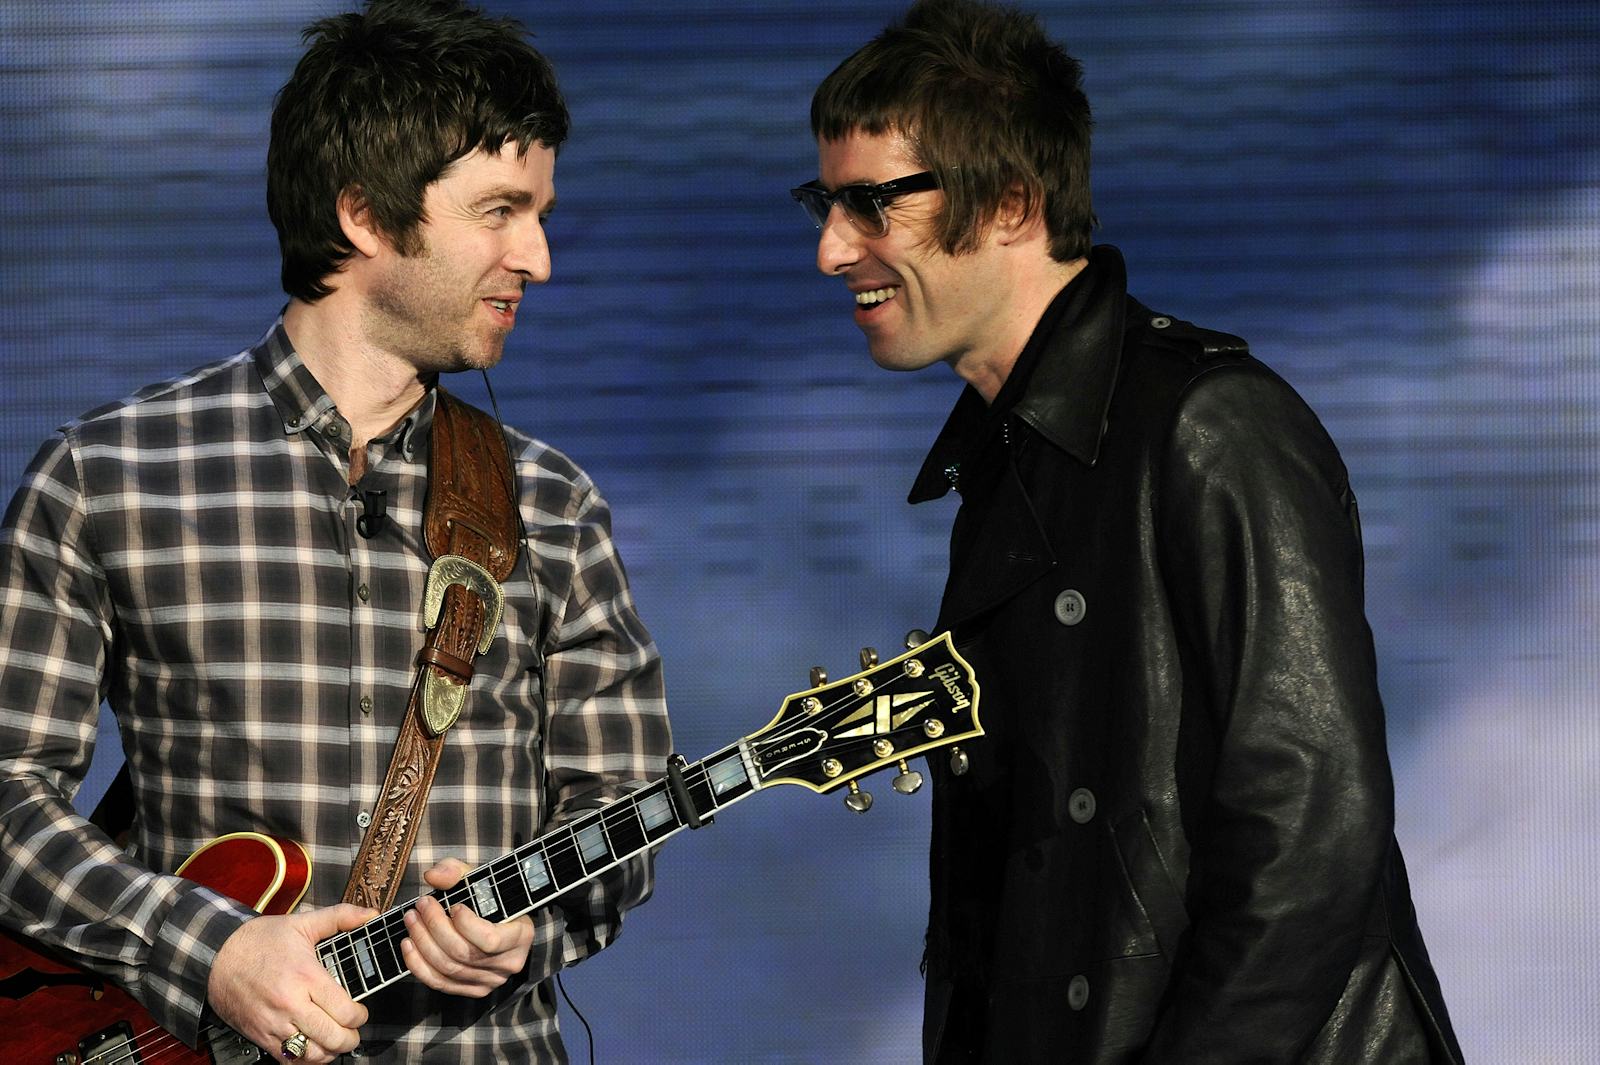 will oasis tour again